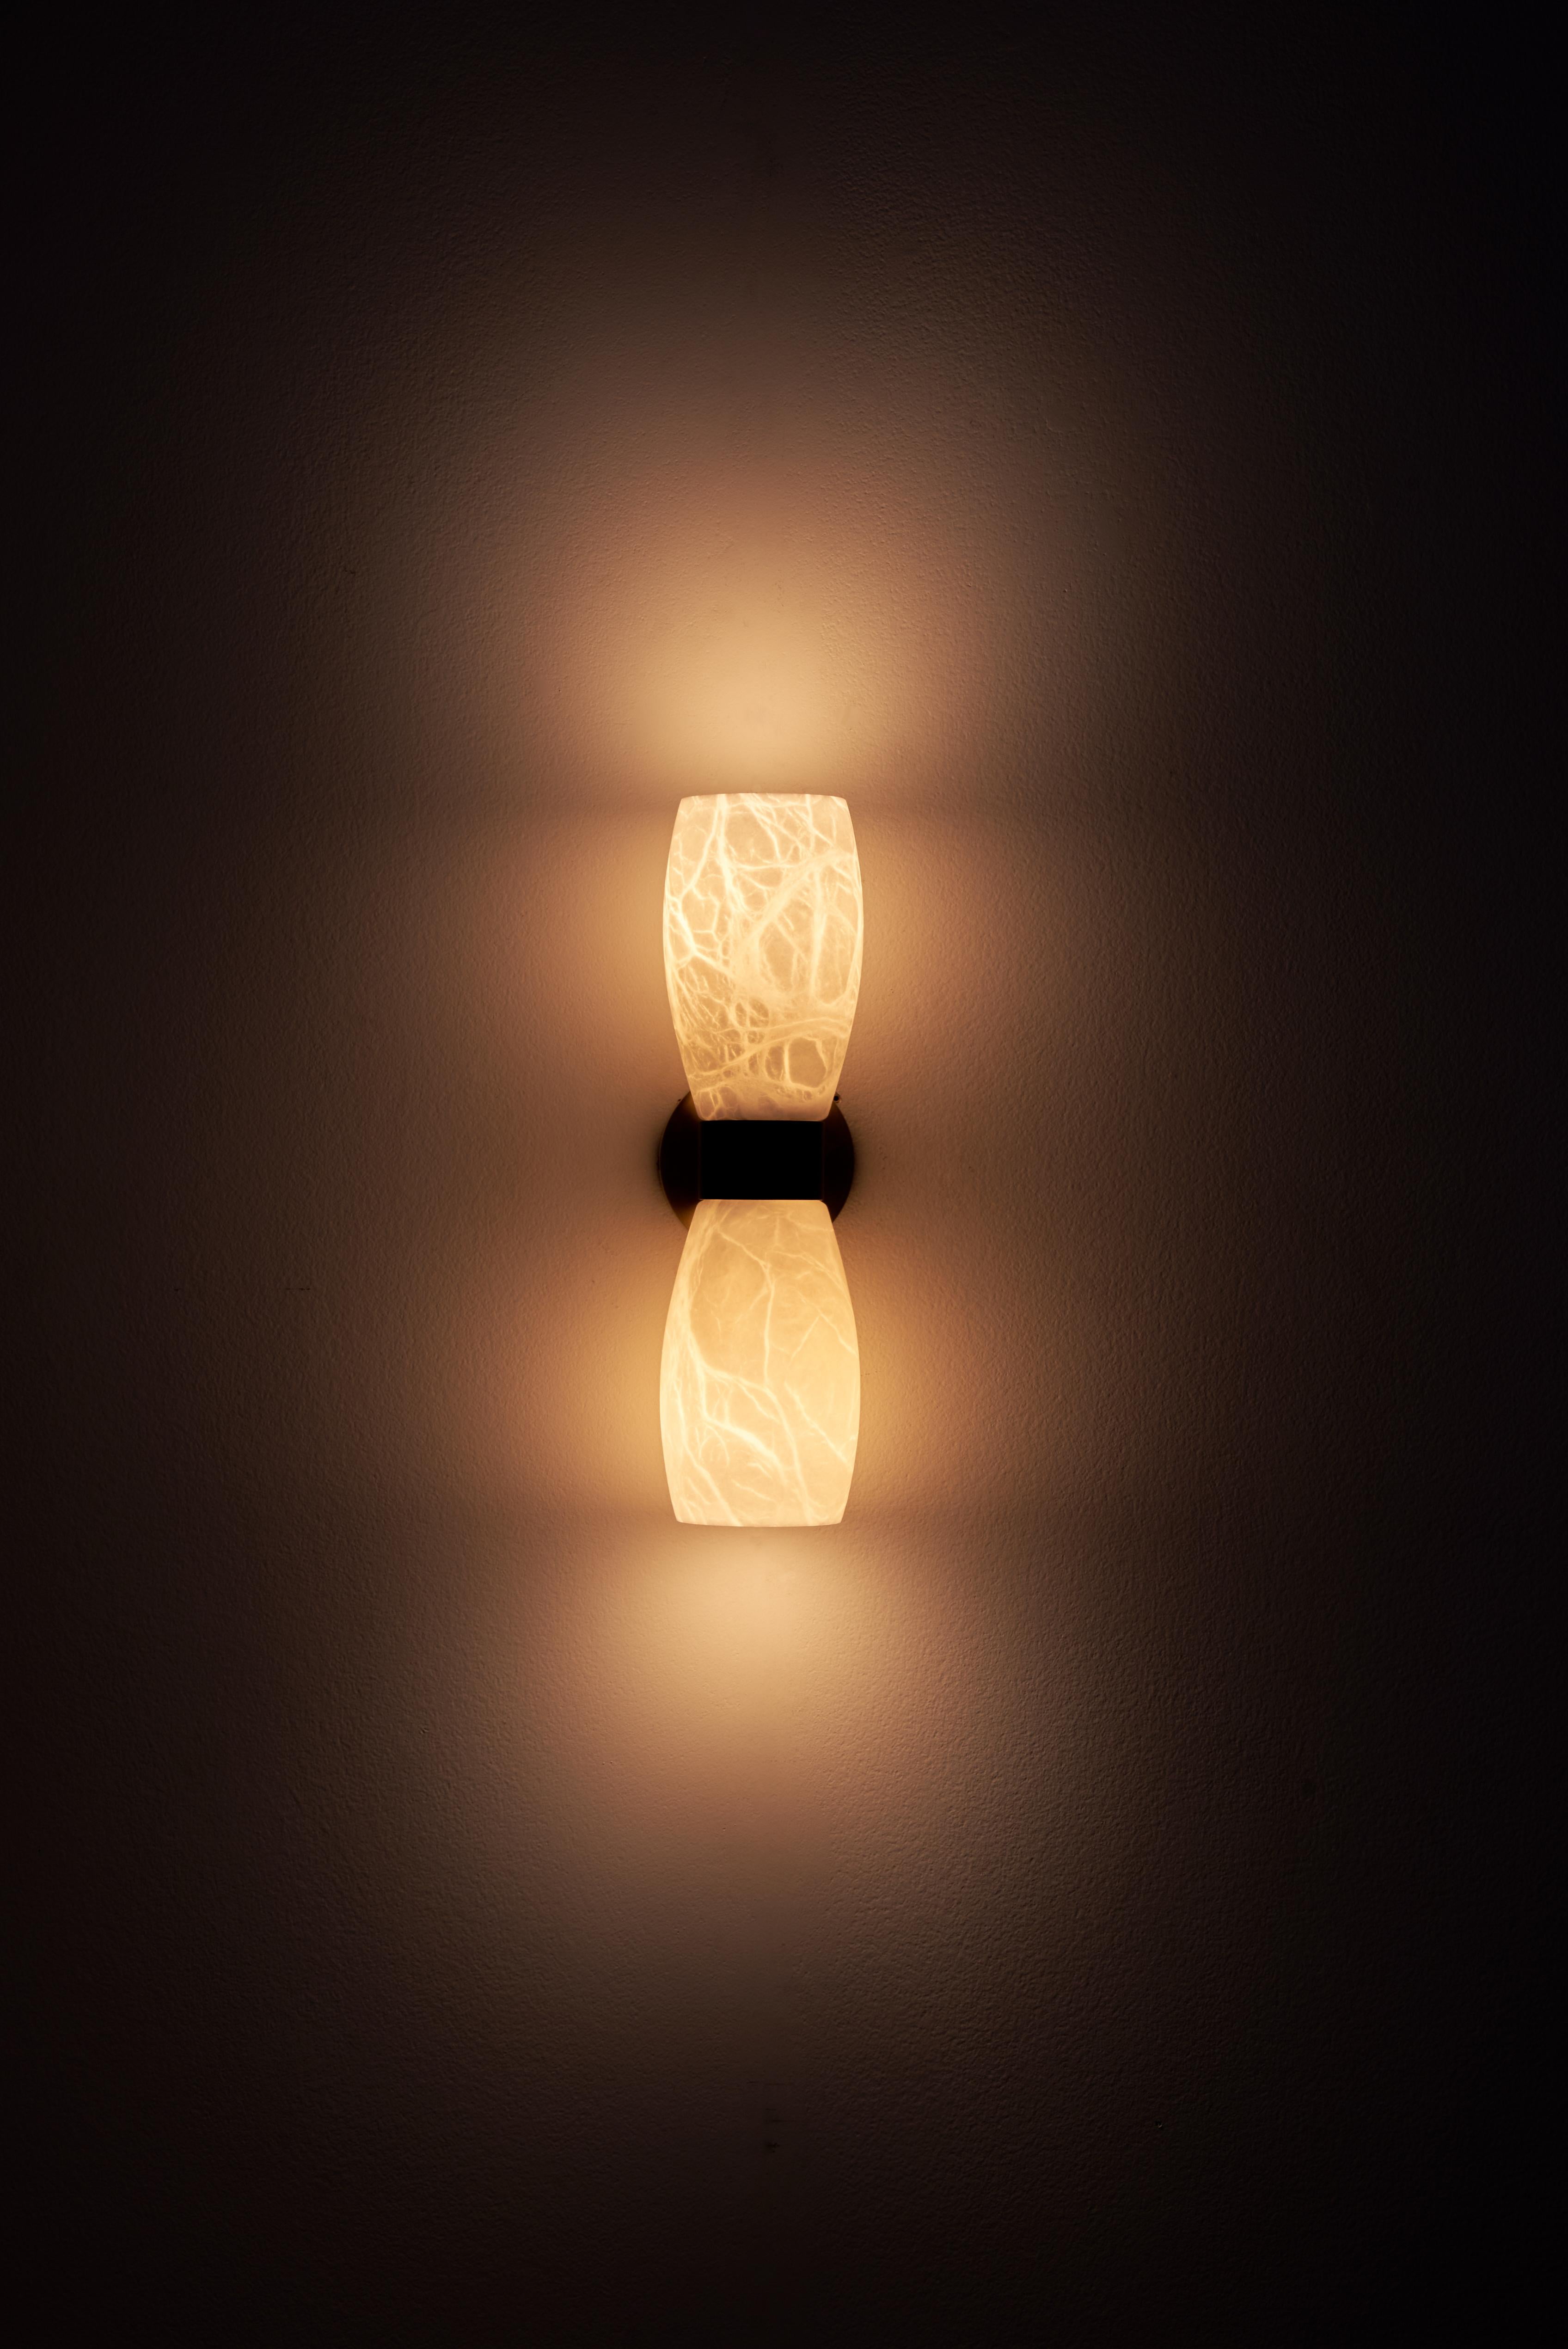 The Demetra wall sconce, inspired by the mid-century style, combines French gold and mat black finishes with alabaster to create a mesmerizing display.
The ethereal glow emitted by the illuminated cups seems to hover in the air, casting a gentle,